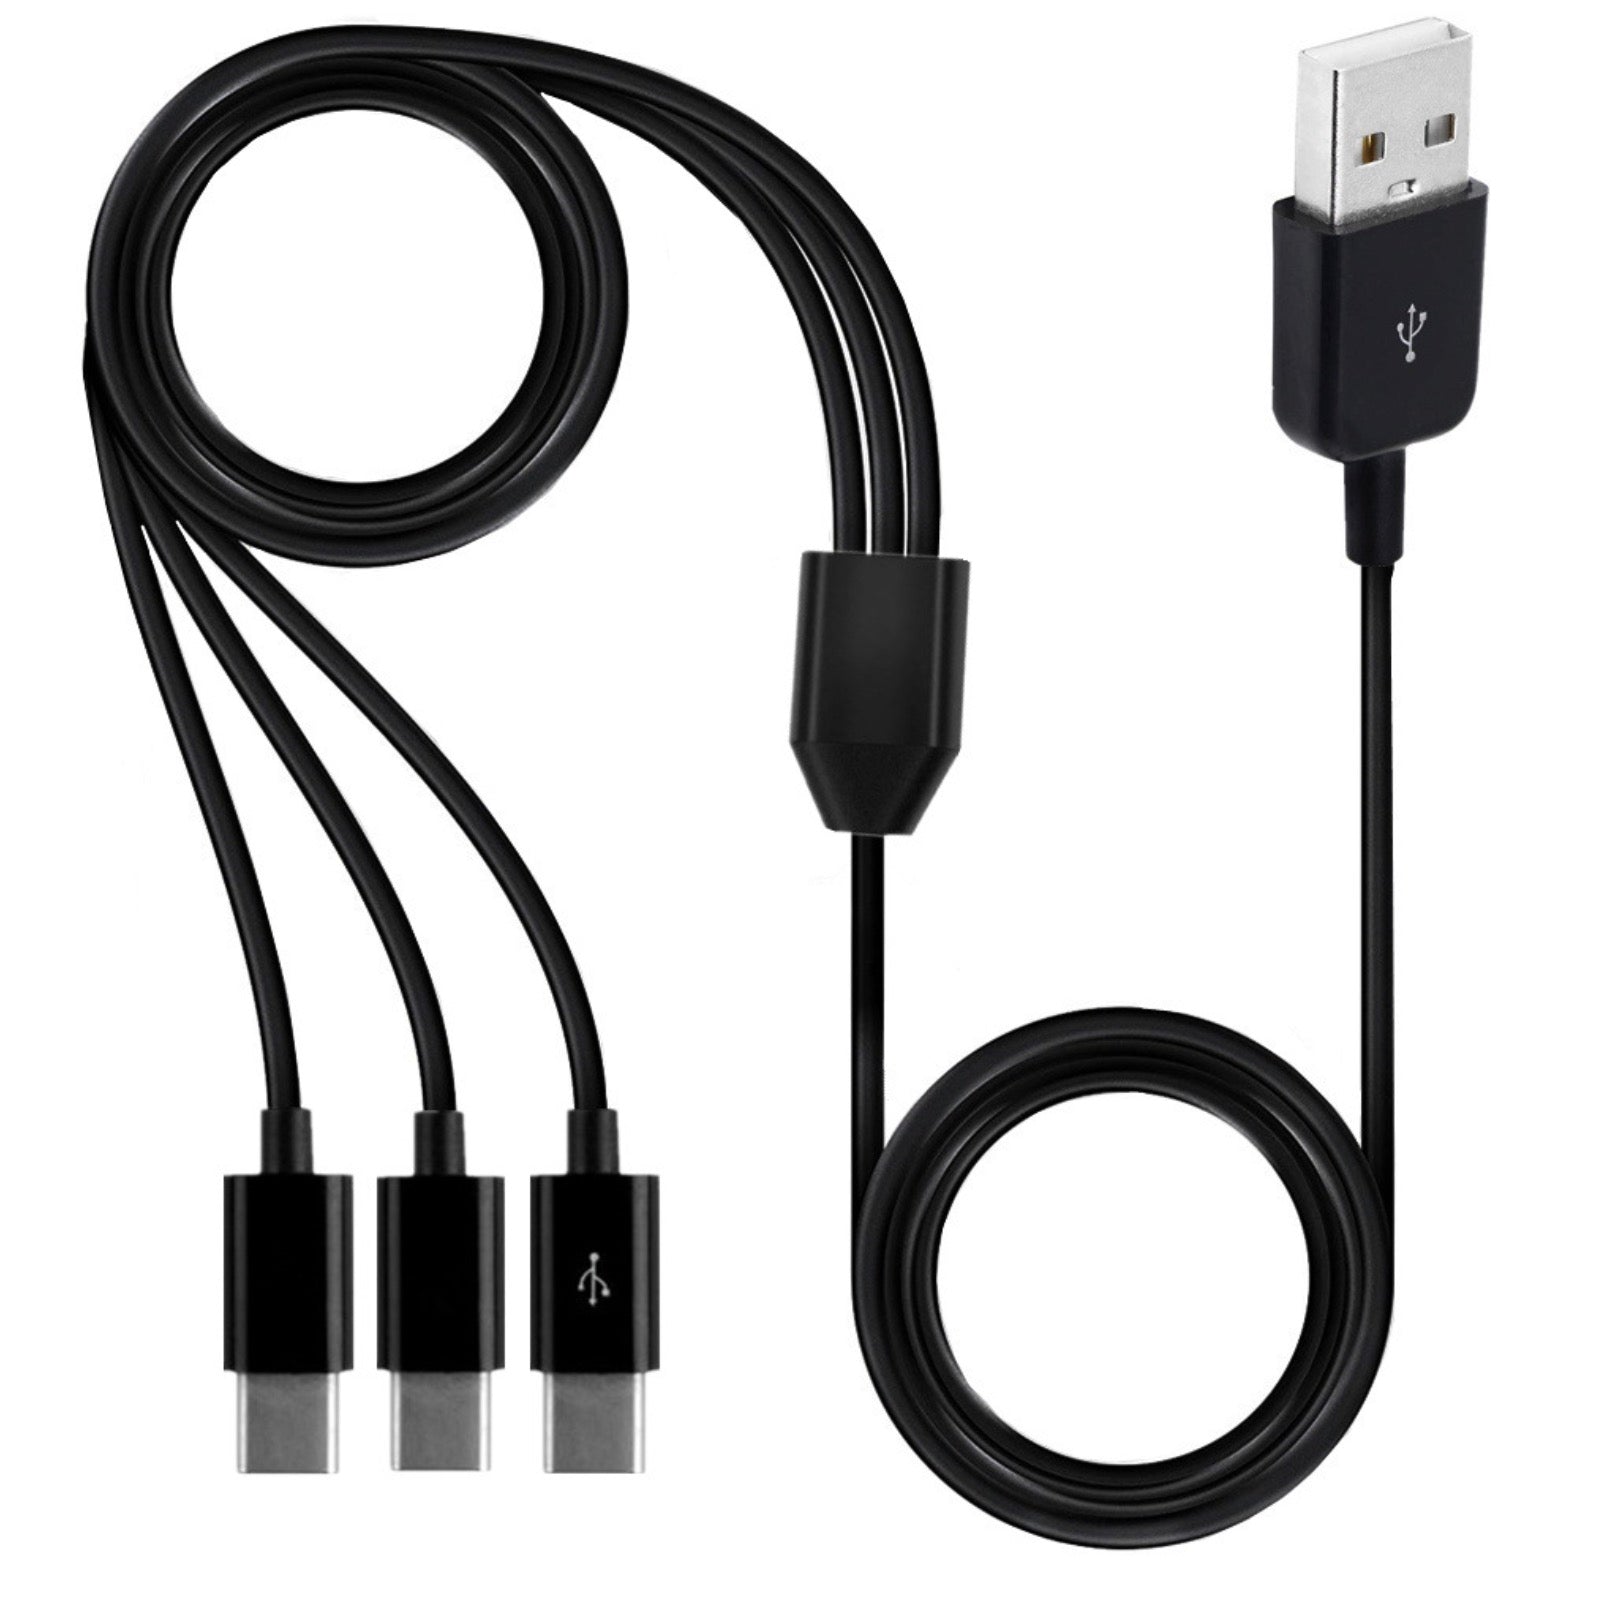 USB 2.0 Type A Male to 3 x USB C Male Splitter Charge and Sync Cable